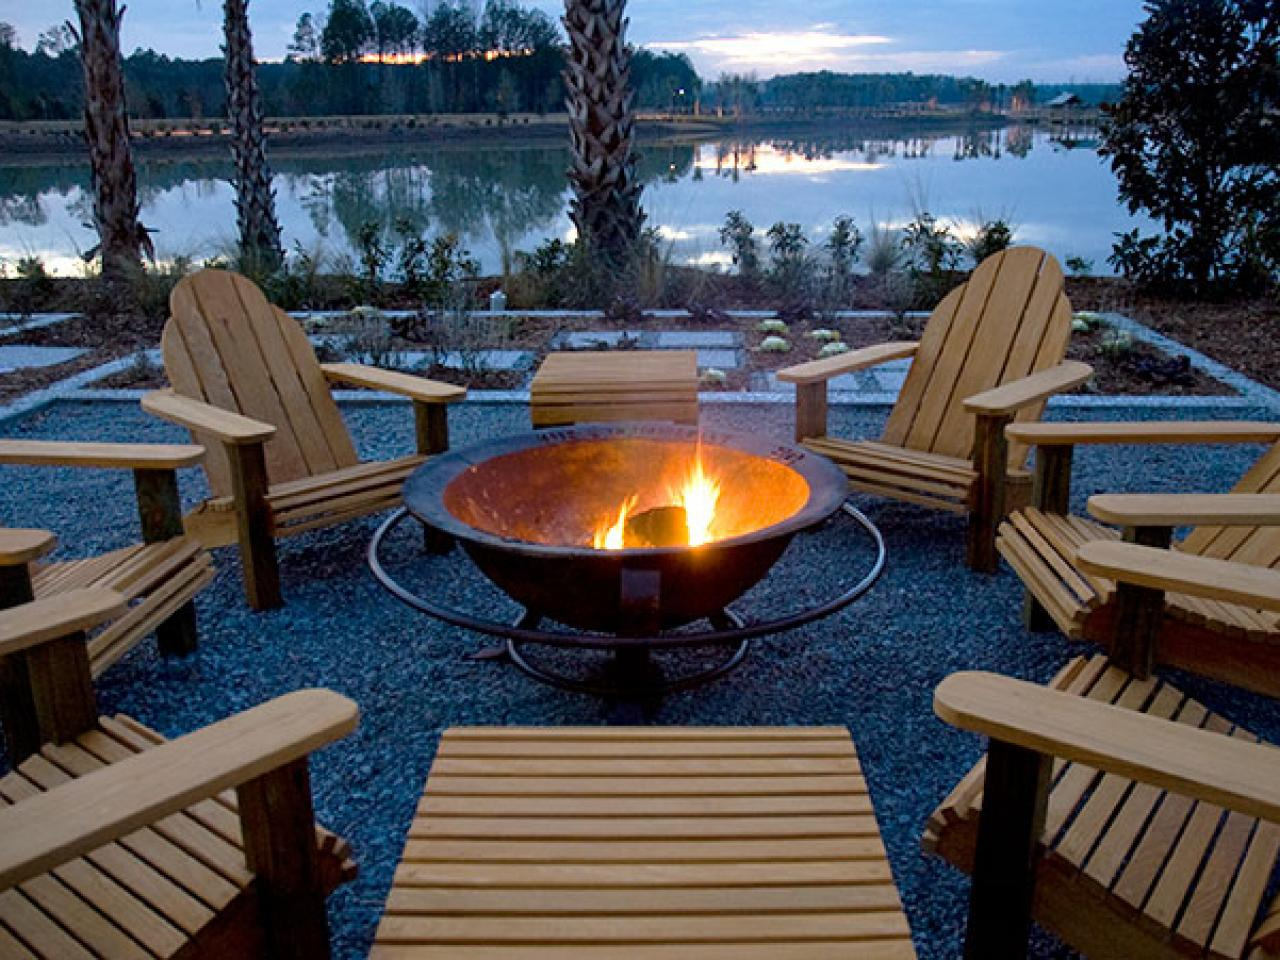 50 Best Outdoor Fire Pit Design Ideas For 2019 intended for proportions 1280 X 960